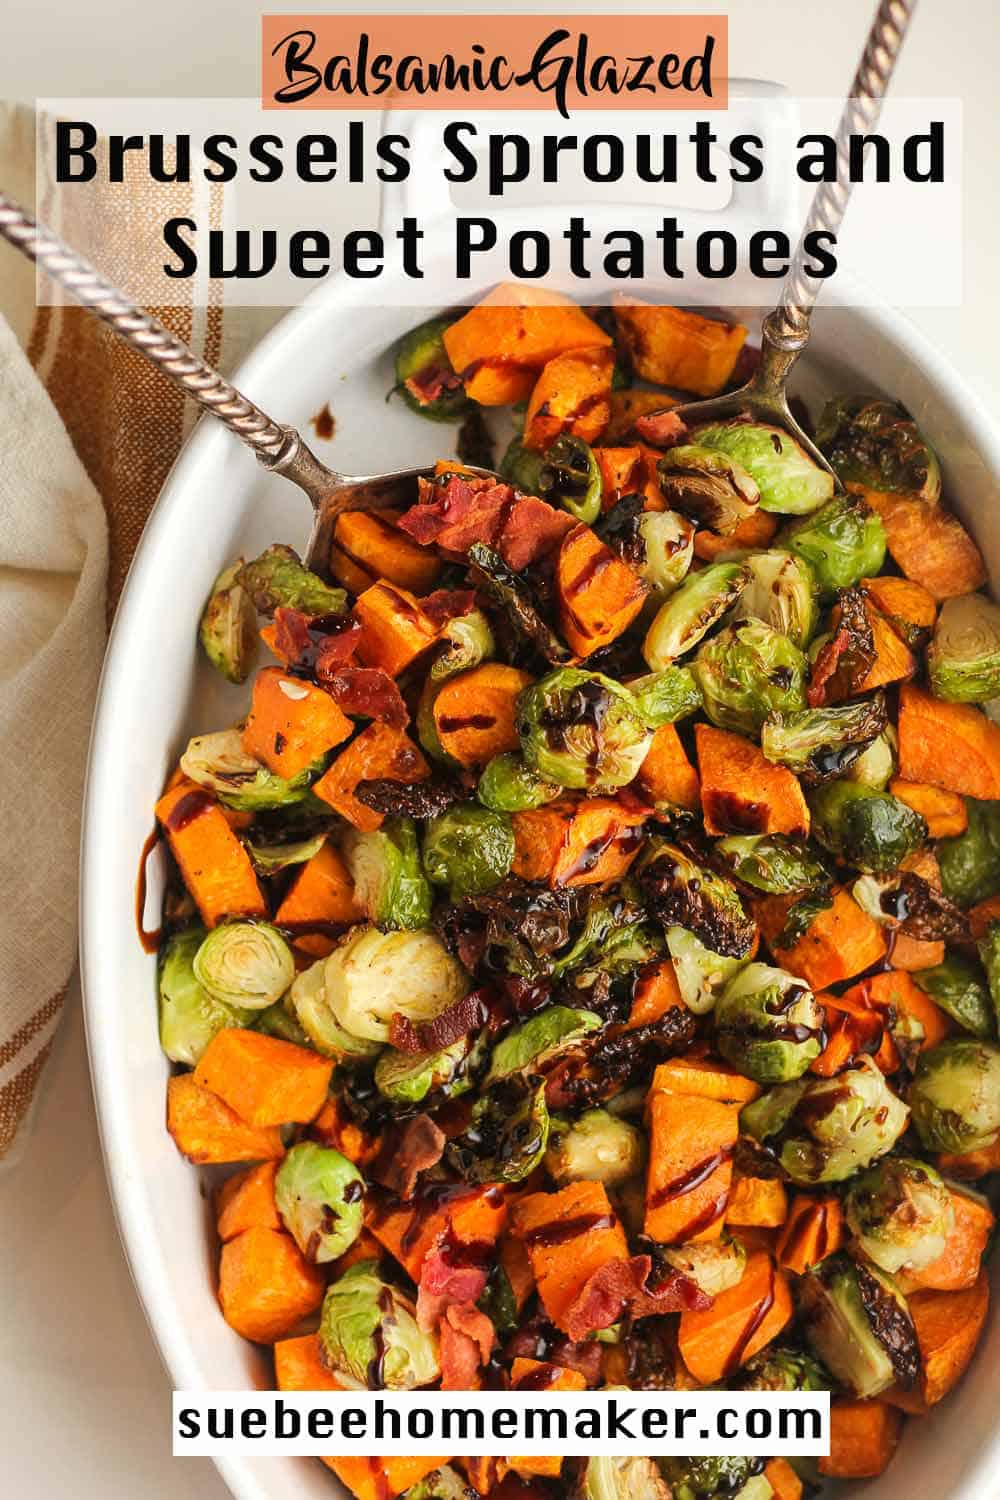 A dish of balsamic glazed Brussels sprouts and sweet potatoes.